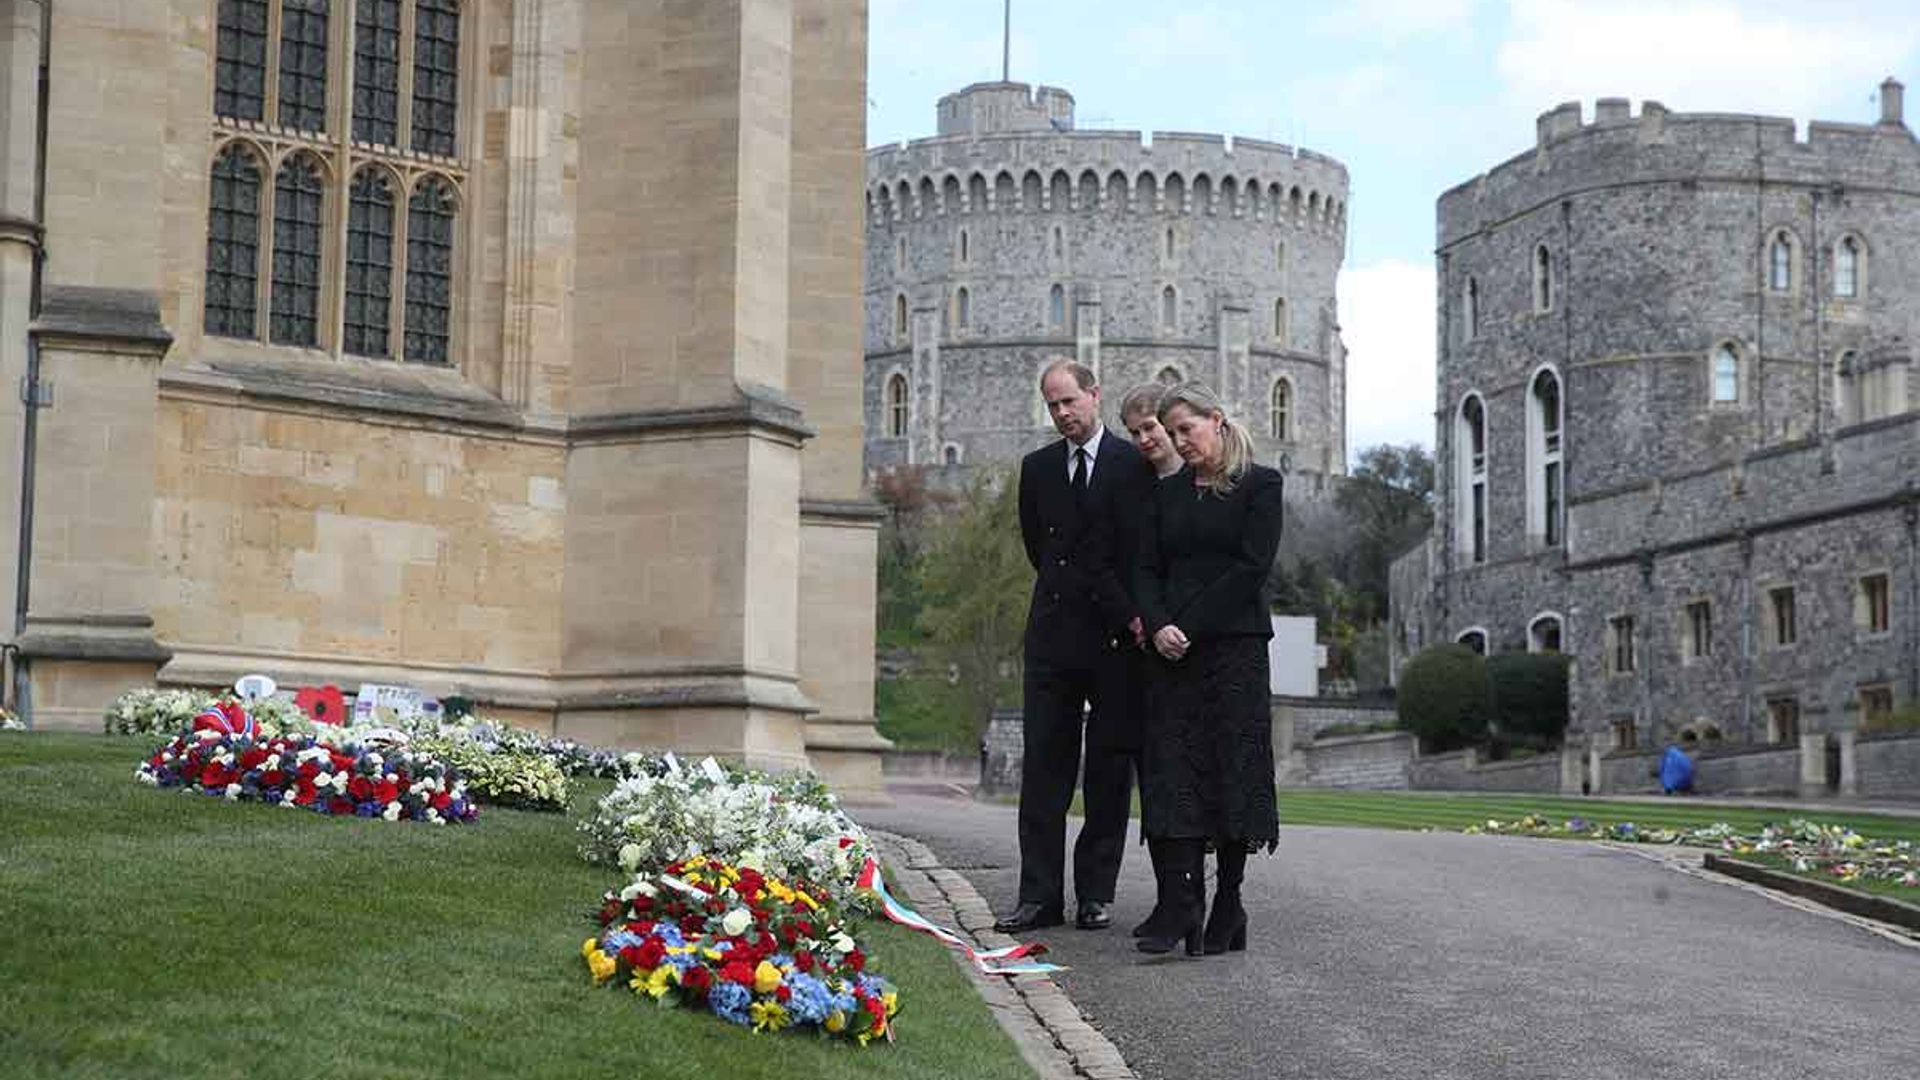 Prince Edward and Sophie joined by Lady Louise Windsor to view floral tributes for Prince Philip